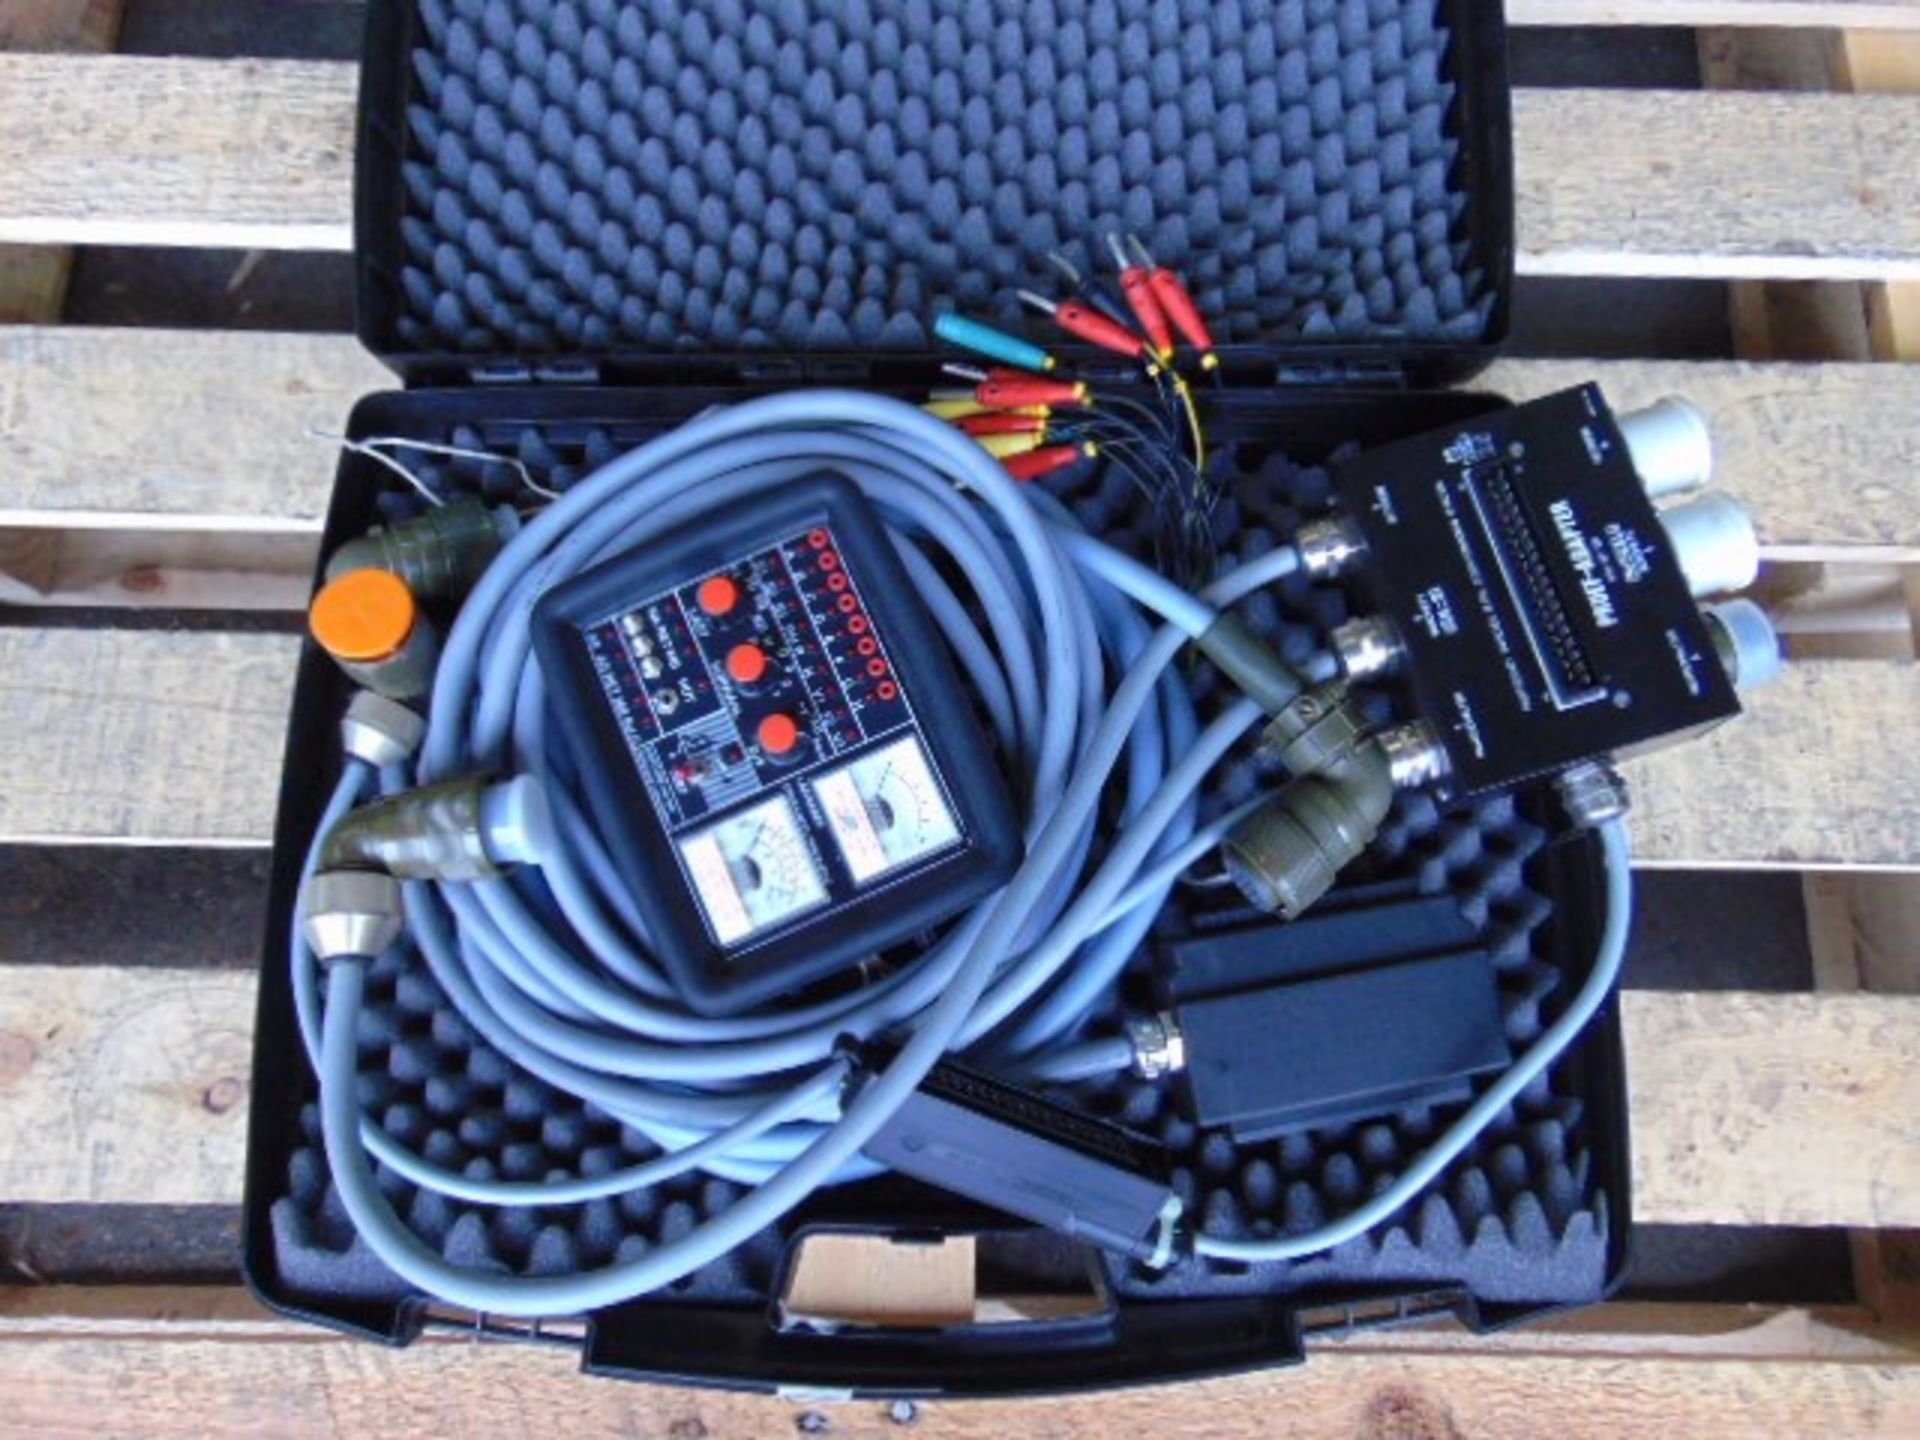 ZF Ecomat Test Kit Complete with PR 61 tester, Preuf Adaptor, Cables, Adaptors etc